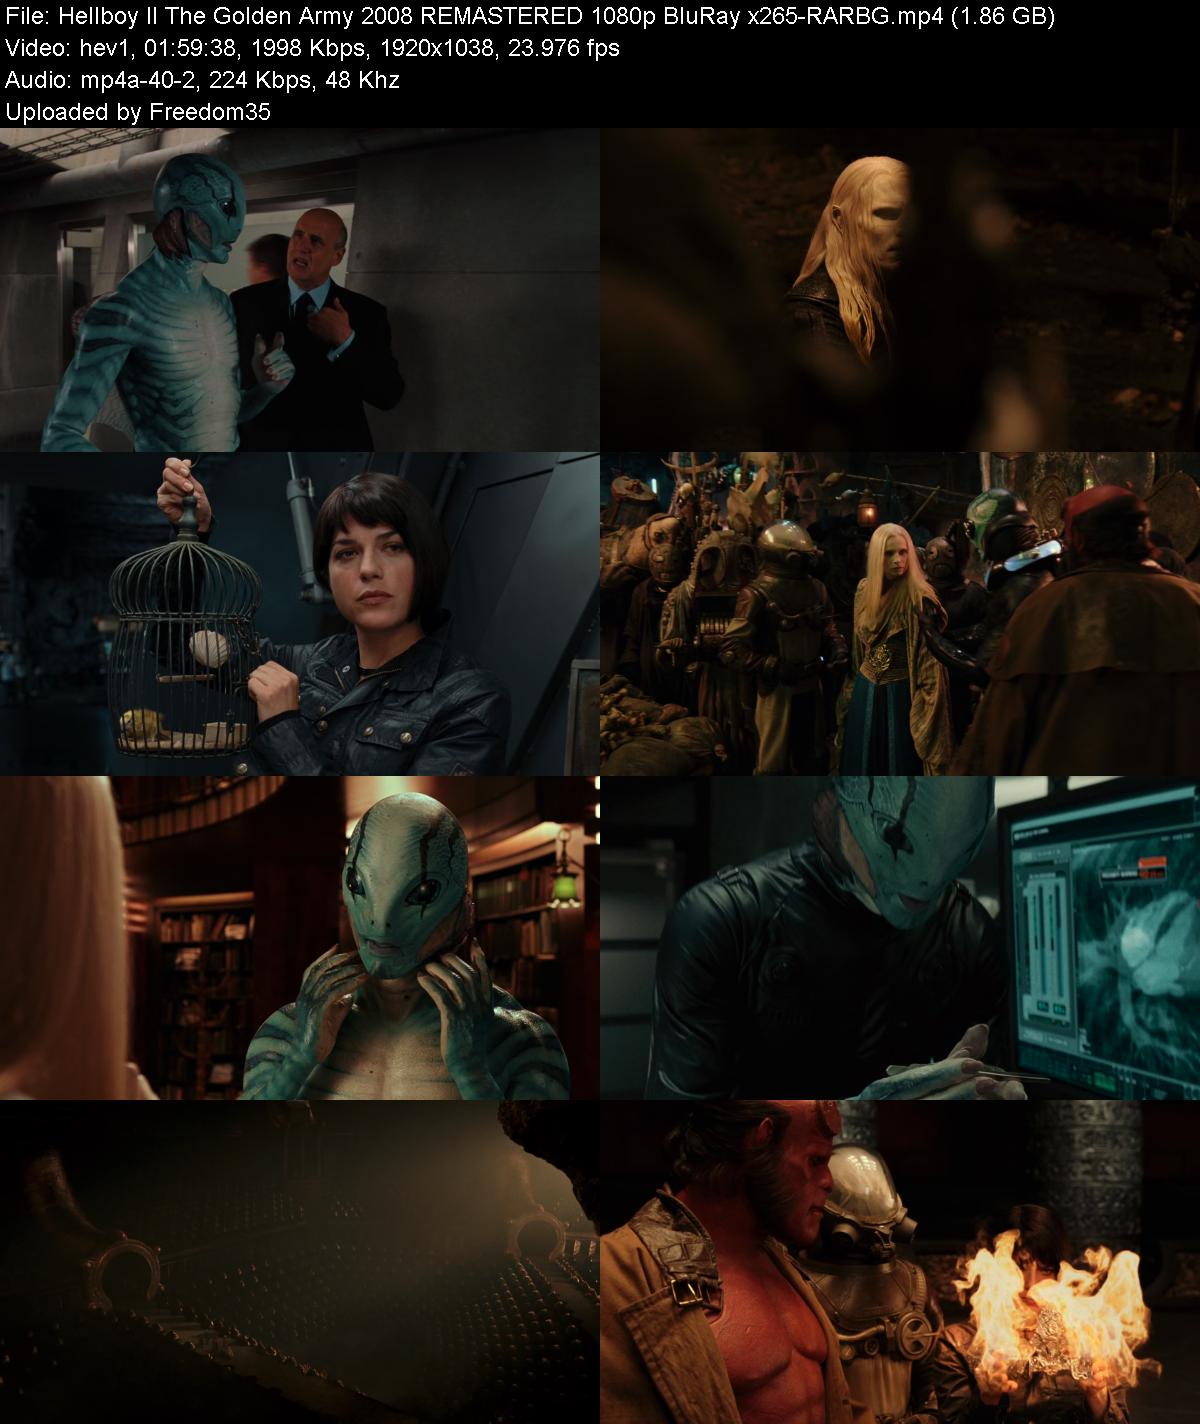 Hellboy-II-The-Golden-Army-2008-REMASTER